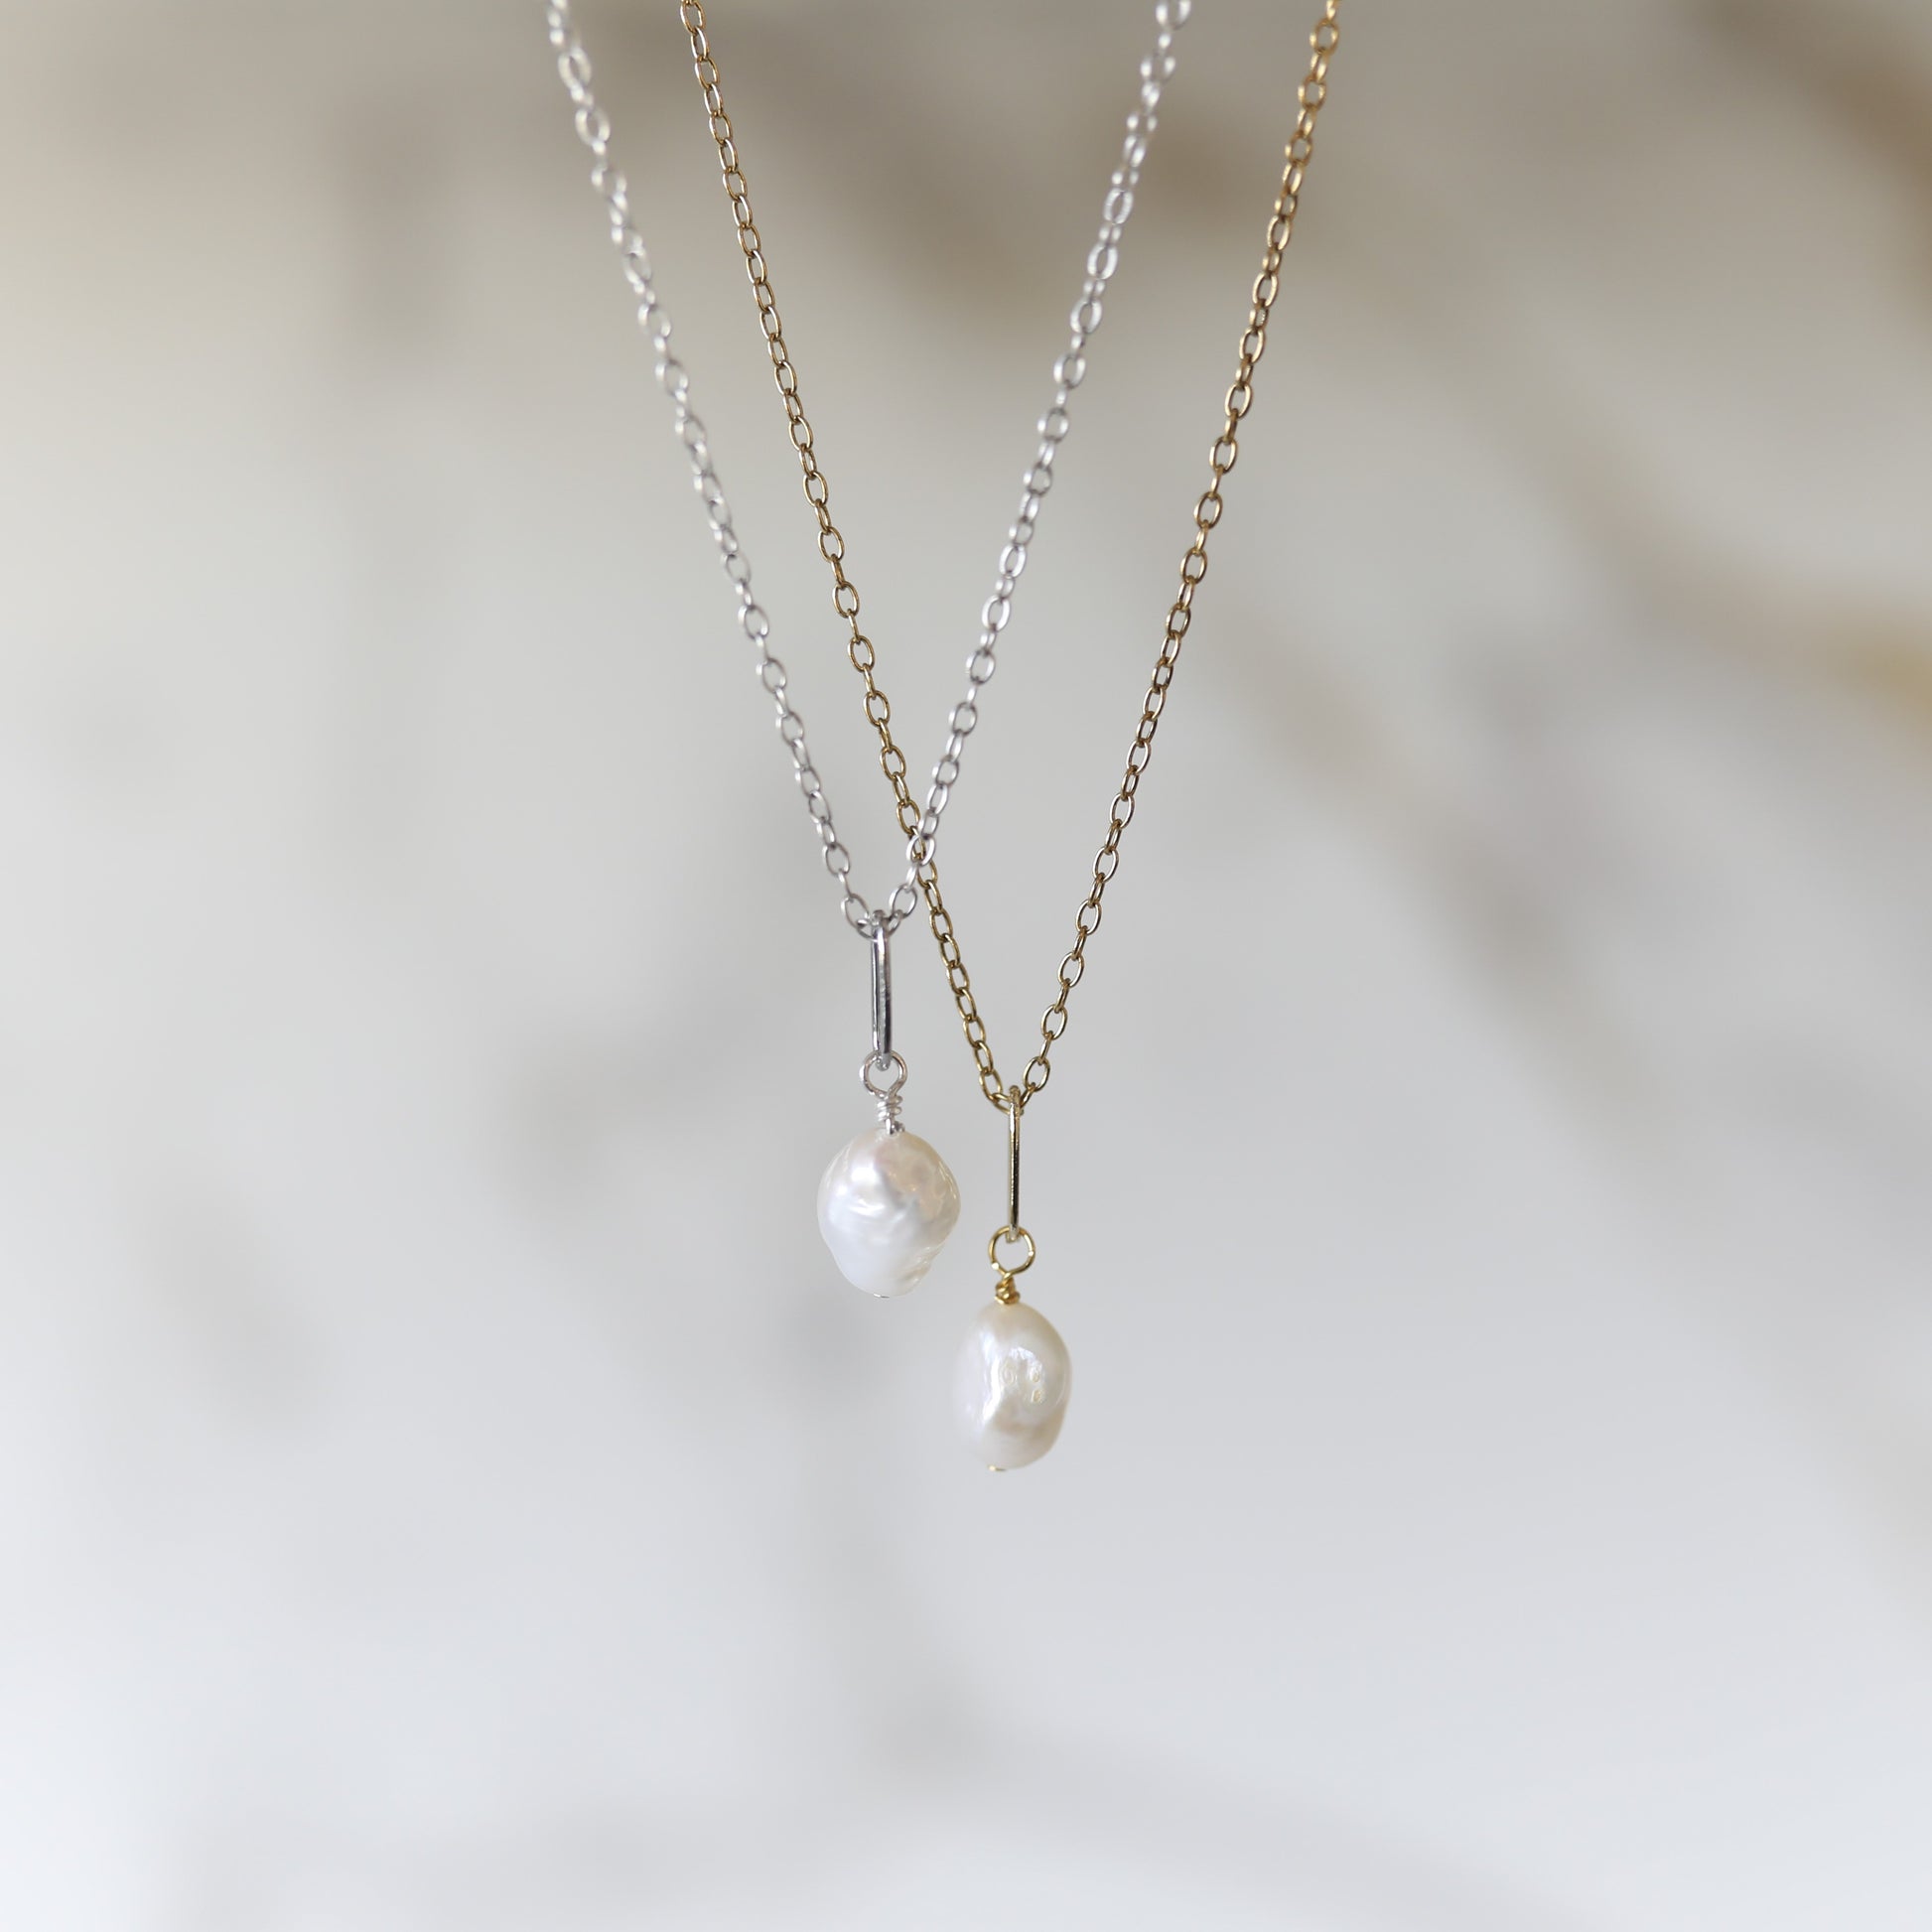 Good Luck Necklace with Freshwater Pearl